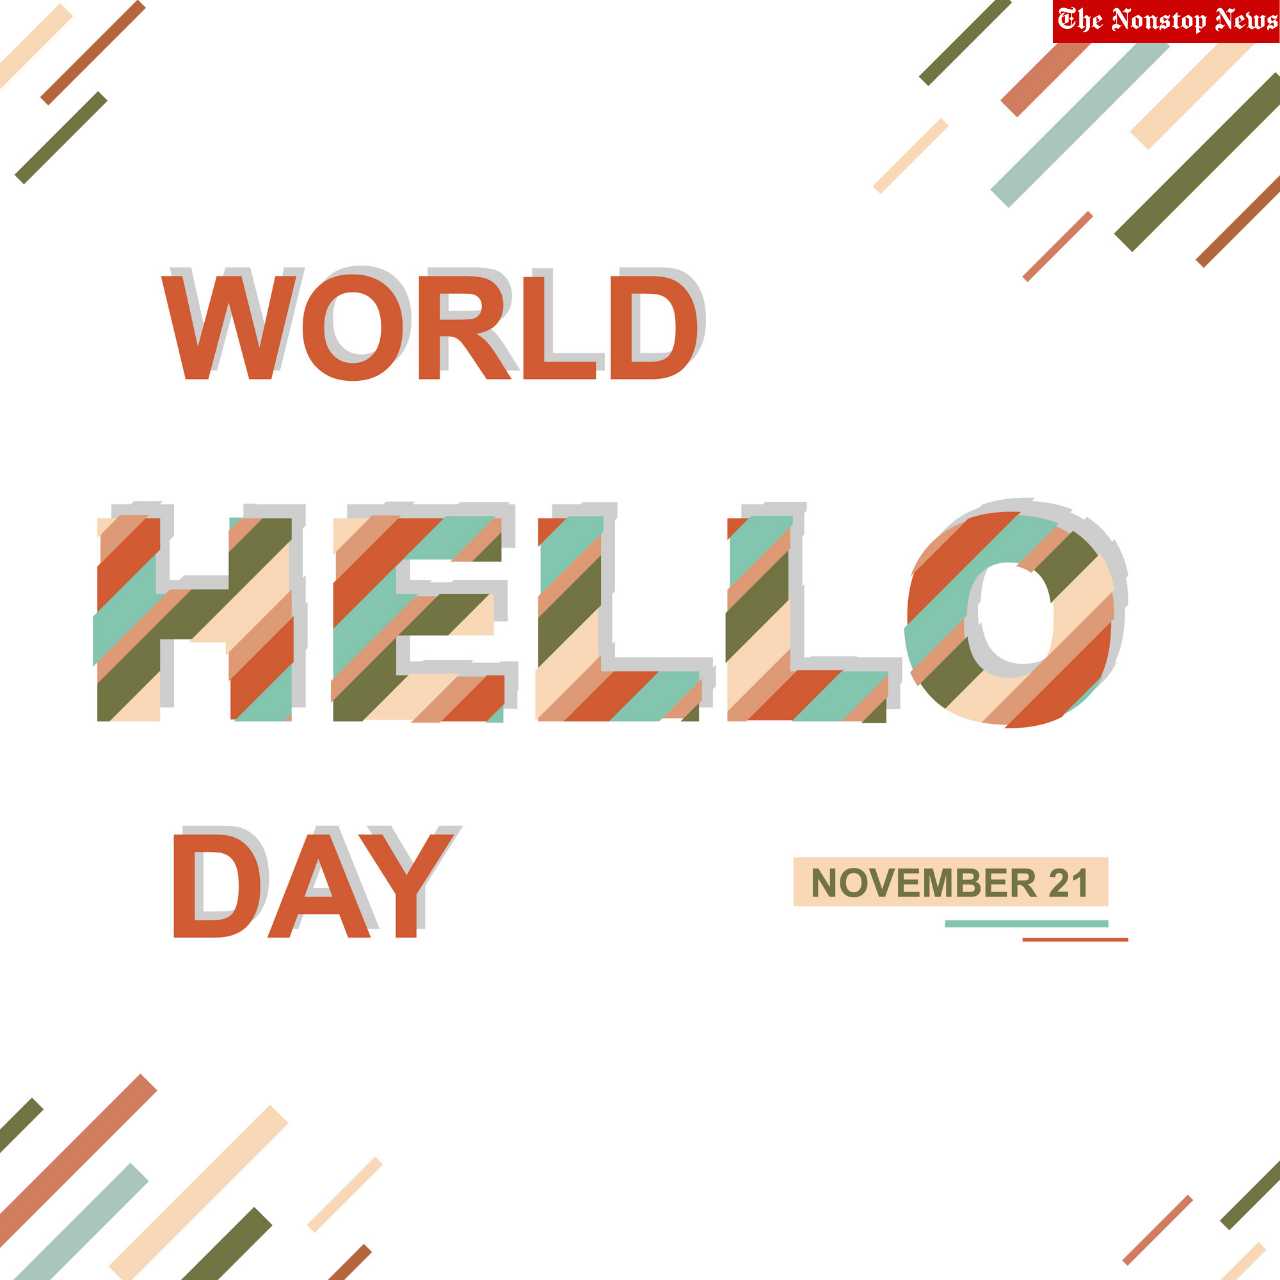 World Hello Day 2021 Quotes, Images, Caption, Drawing, and Messages to Share